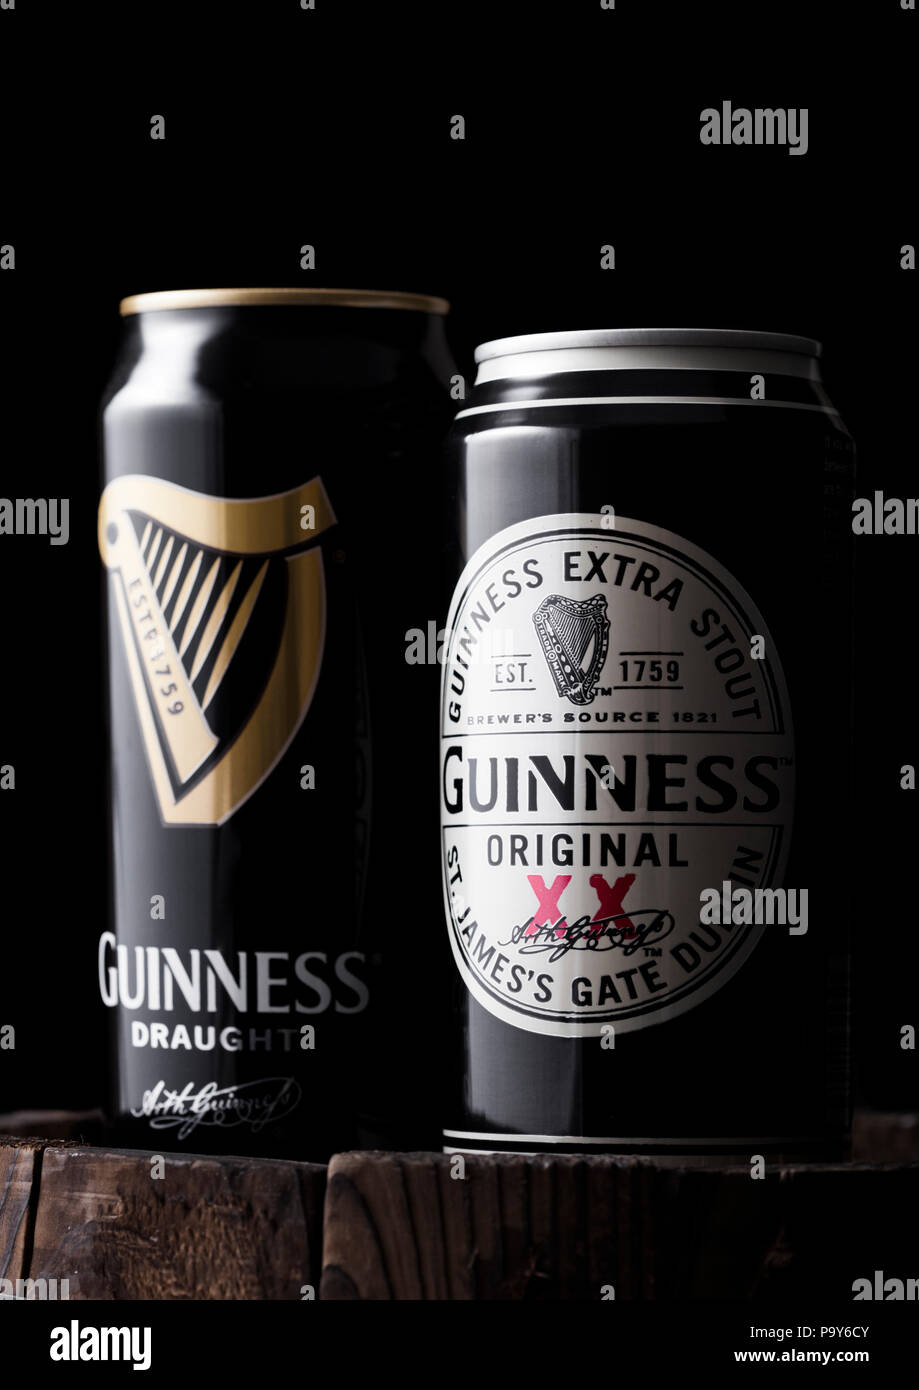 LONDON, UK - APRIL 27, 2018: Aluminium can of Guinness original and draught stout beer on top of old wooden barrel. Guinness beer has been produced si Stock Photo